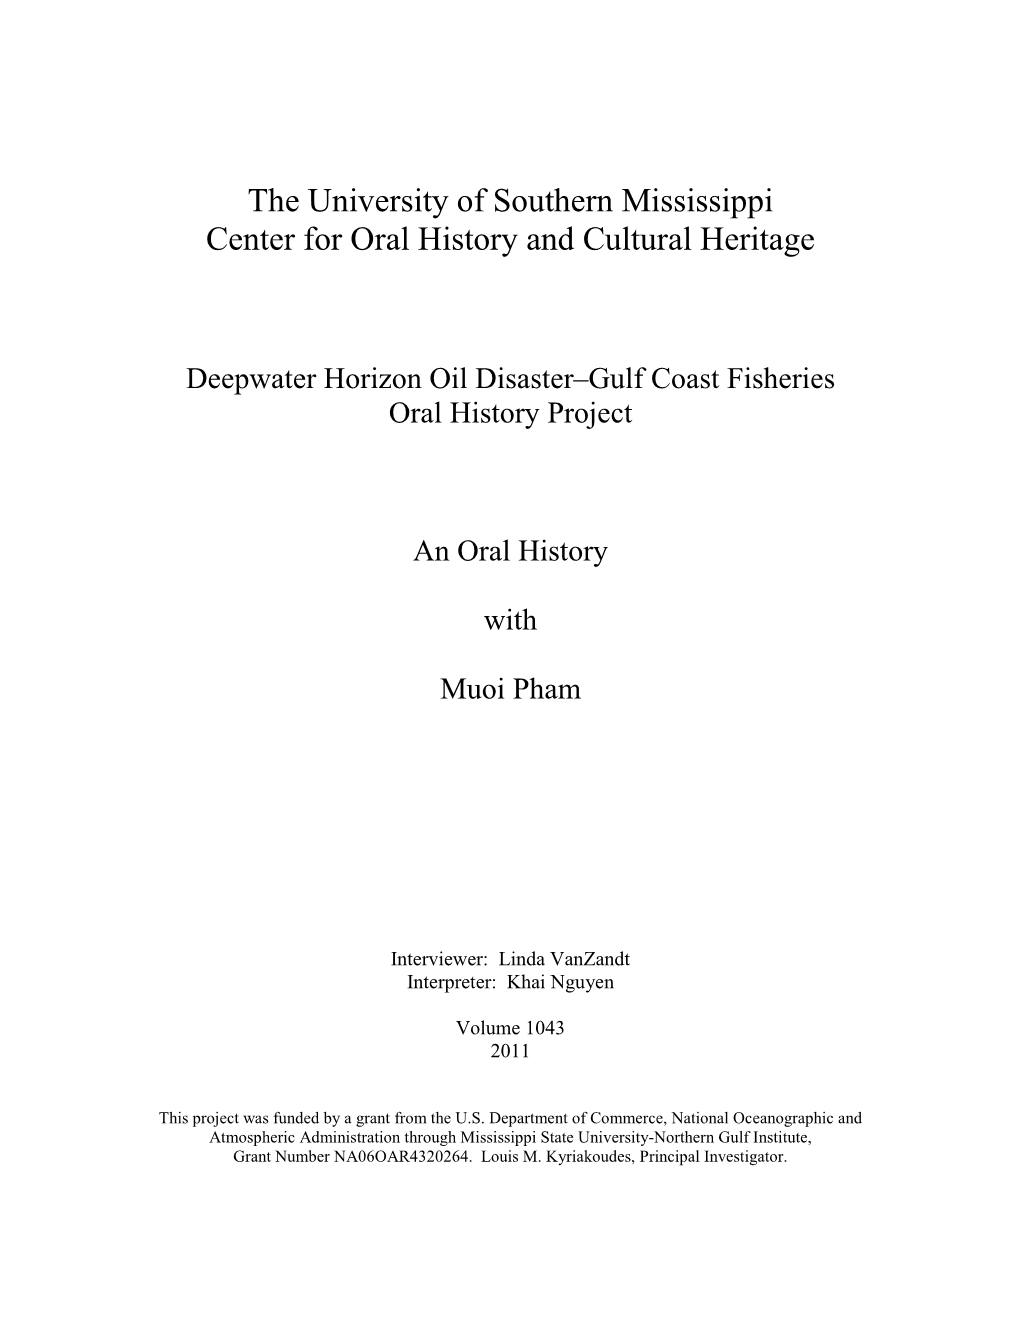 The University of Southern Mississippi Center for Oral History and Cultural Heritage